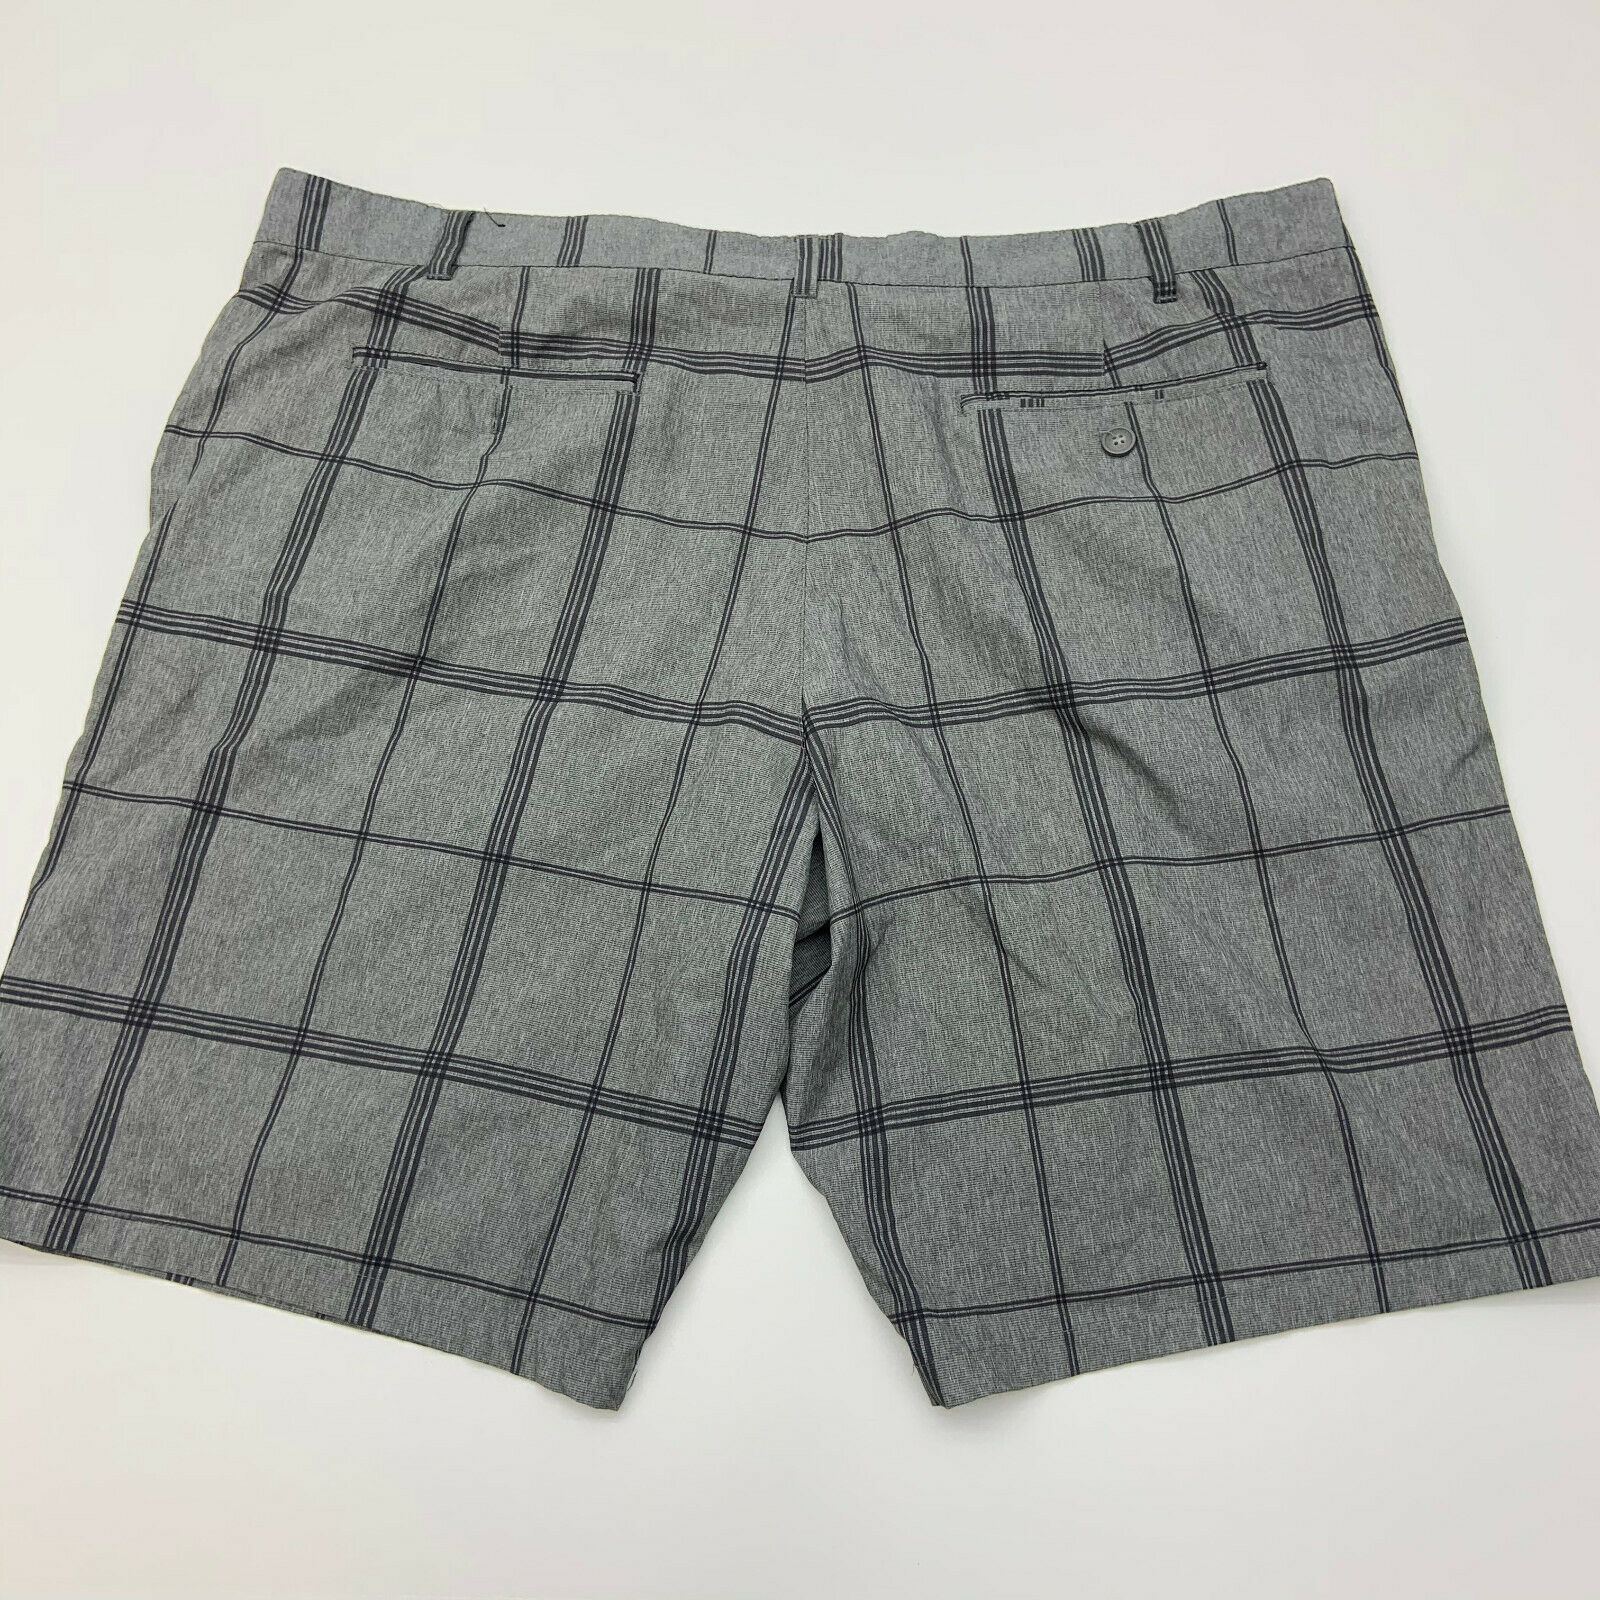 OP Flex 4 Way Stretch Board Shorts Mens 46 Gray Check Polyester Casual ...